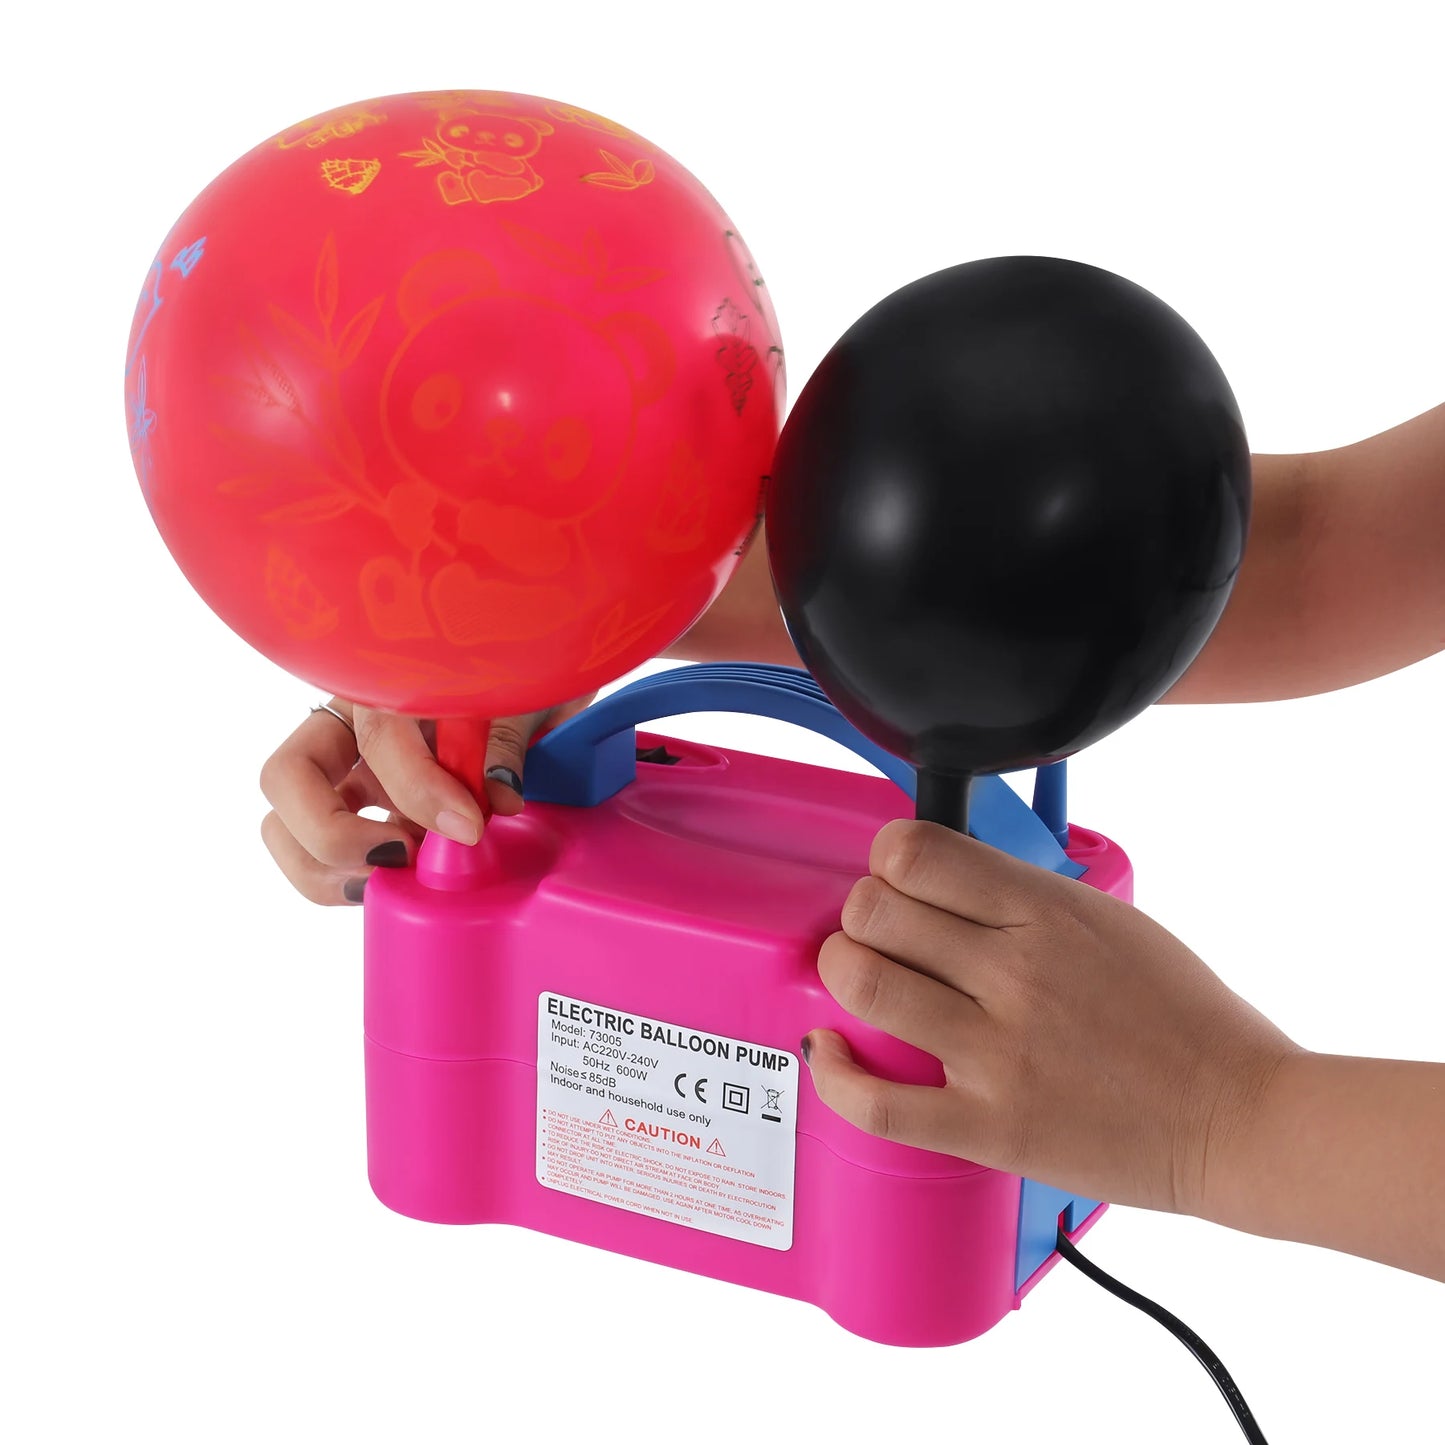 Samger 220V Electric Balloon Air Pump: High-Power Two-Nozzle Inflator for Fast Party Decorations